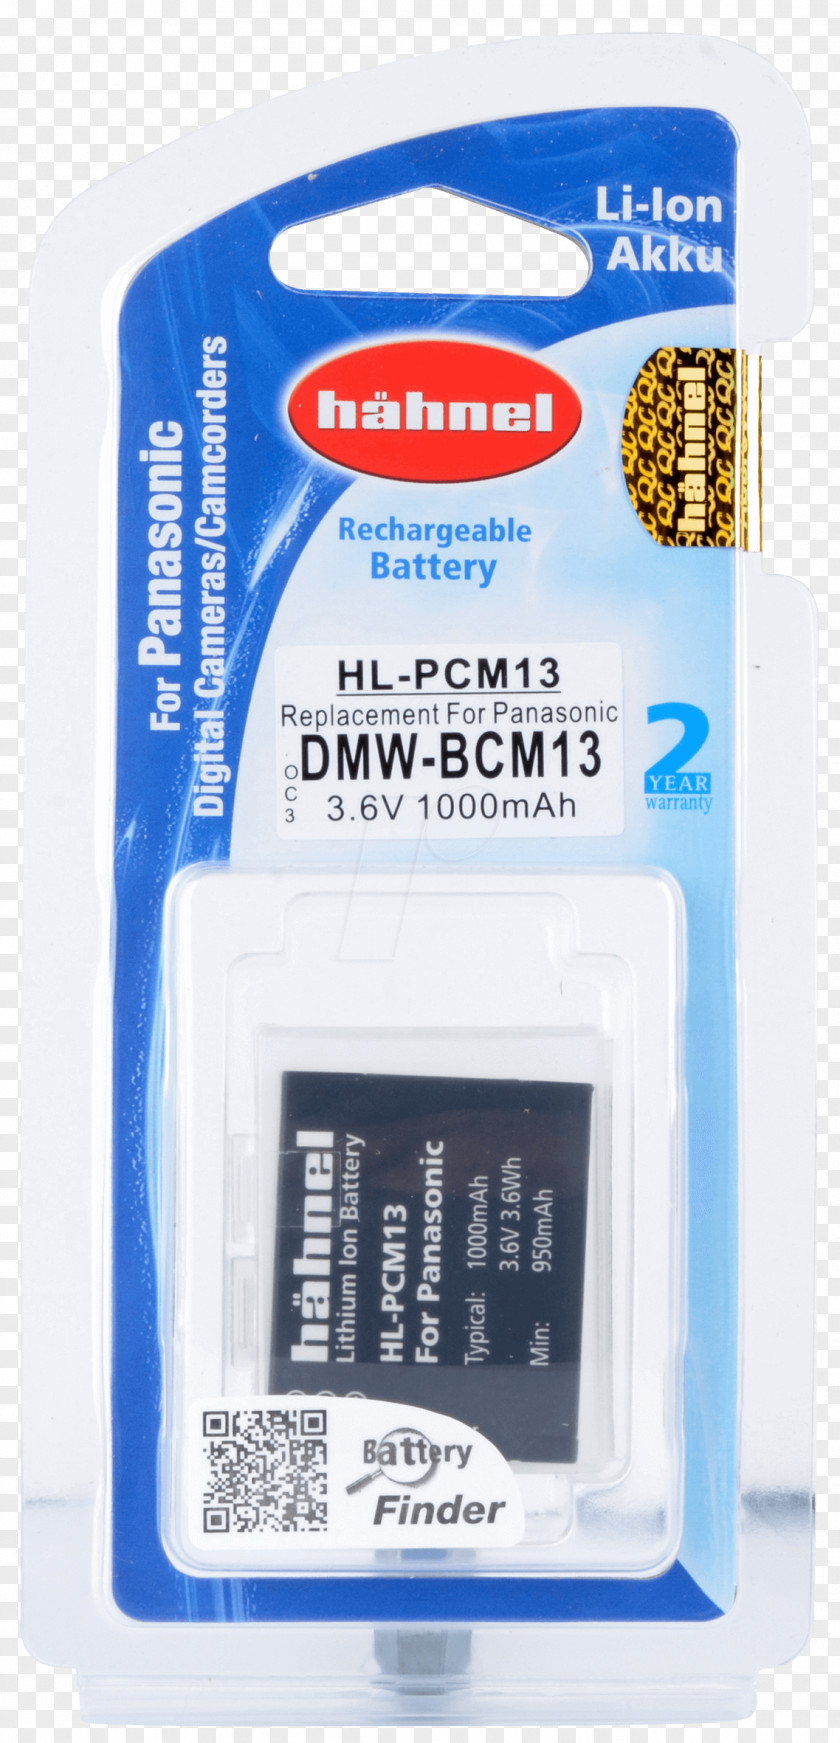 Camera Battery Charger Lithium-ion Electric Panasonic Rechargeable PNG